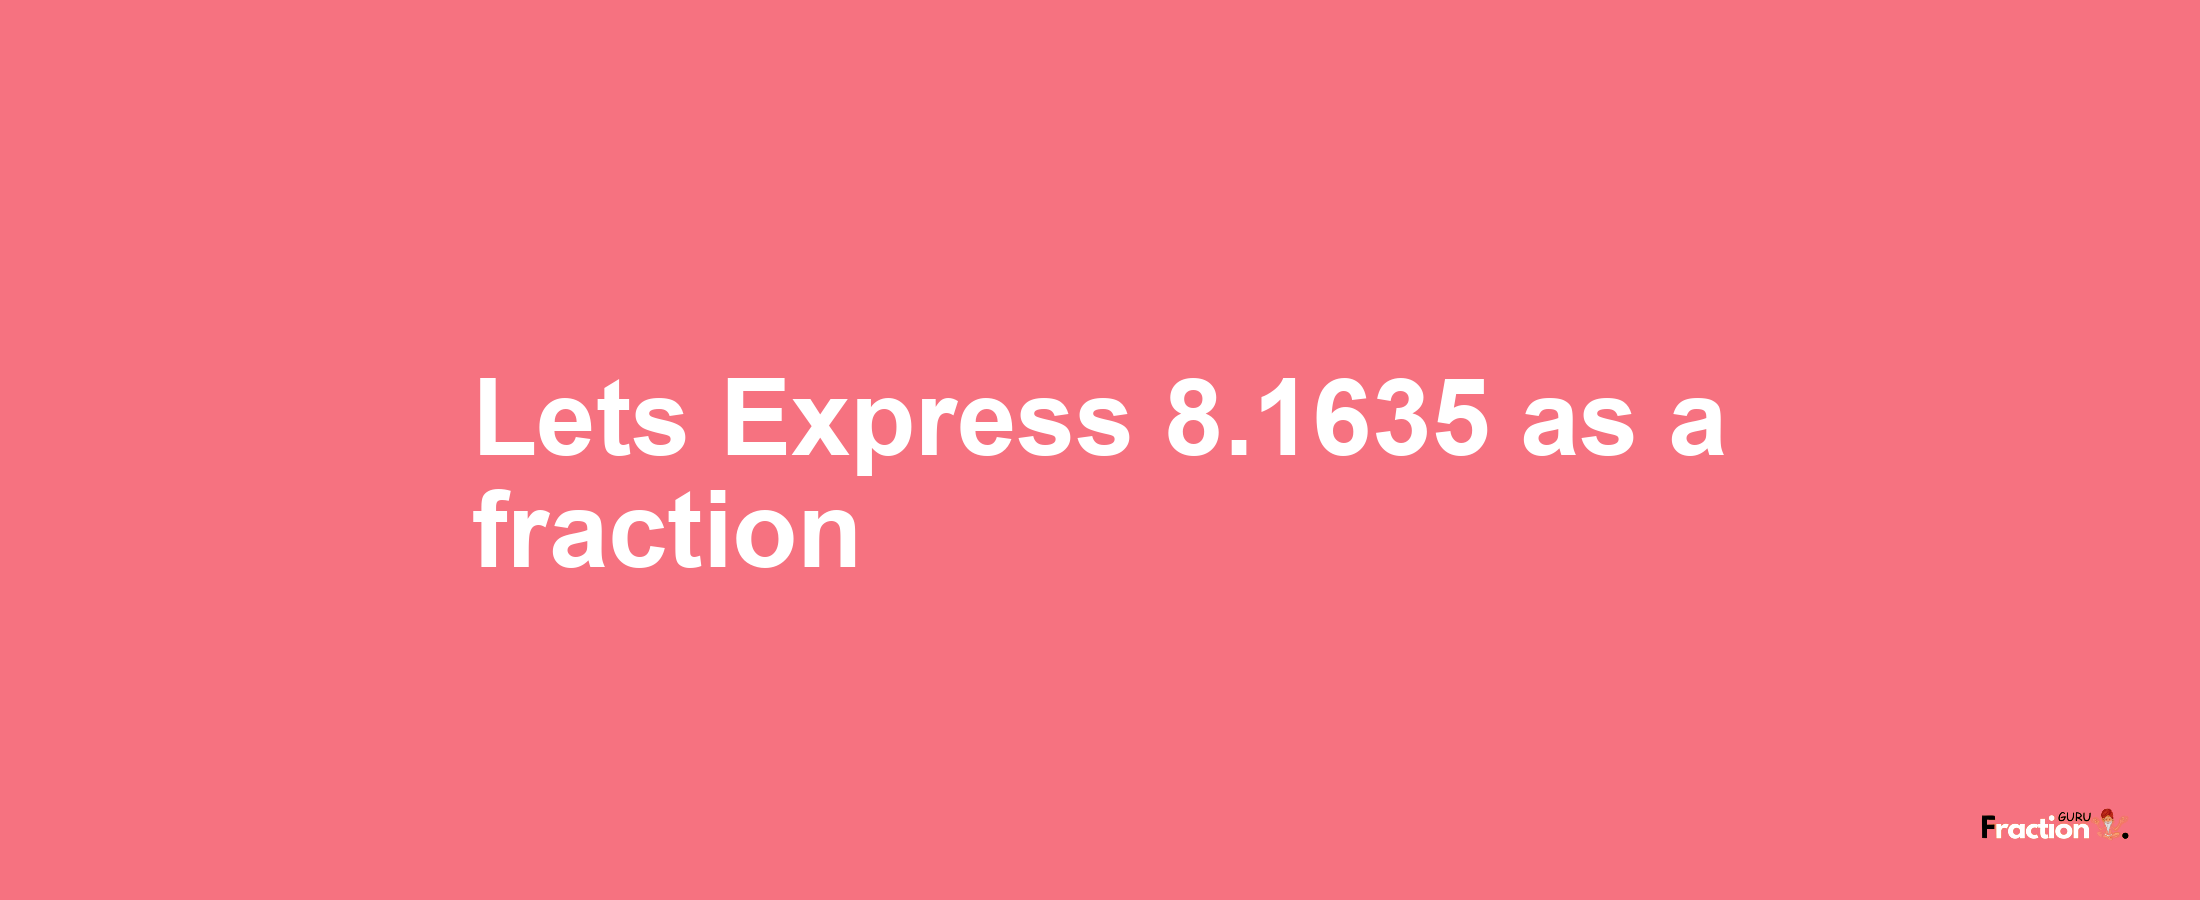 Lets Express 8.1635 as afraction